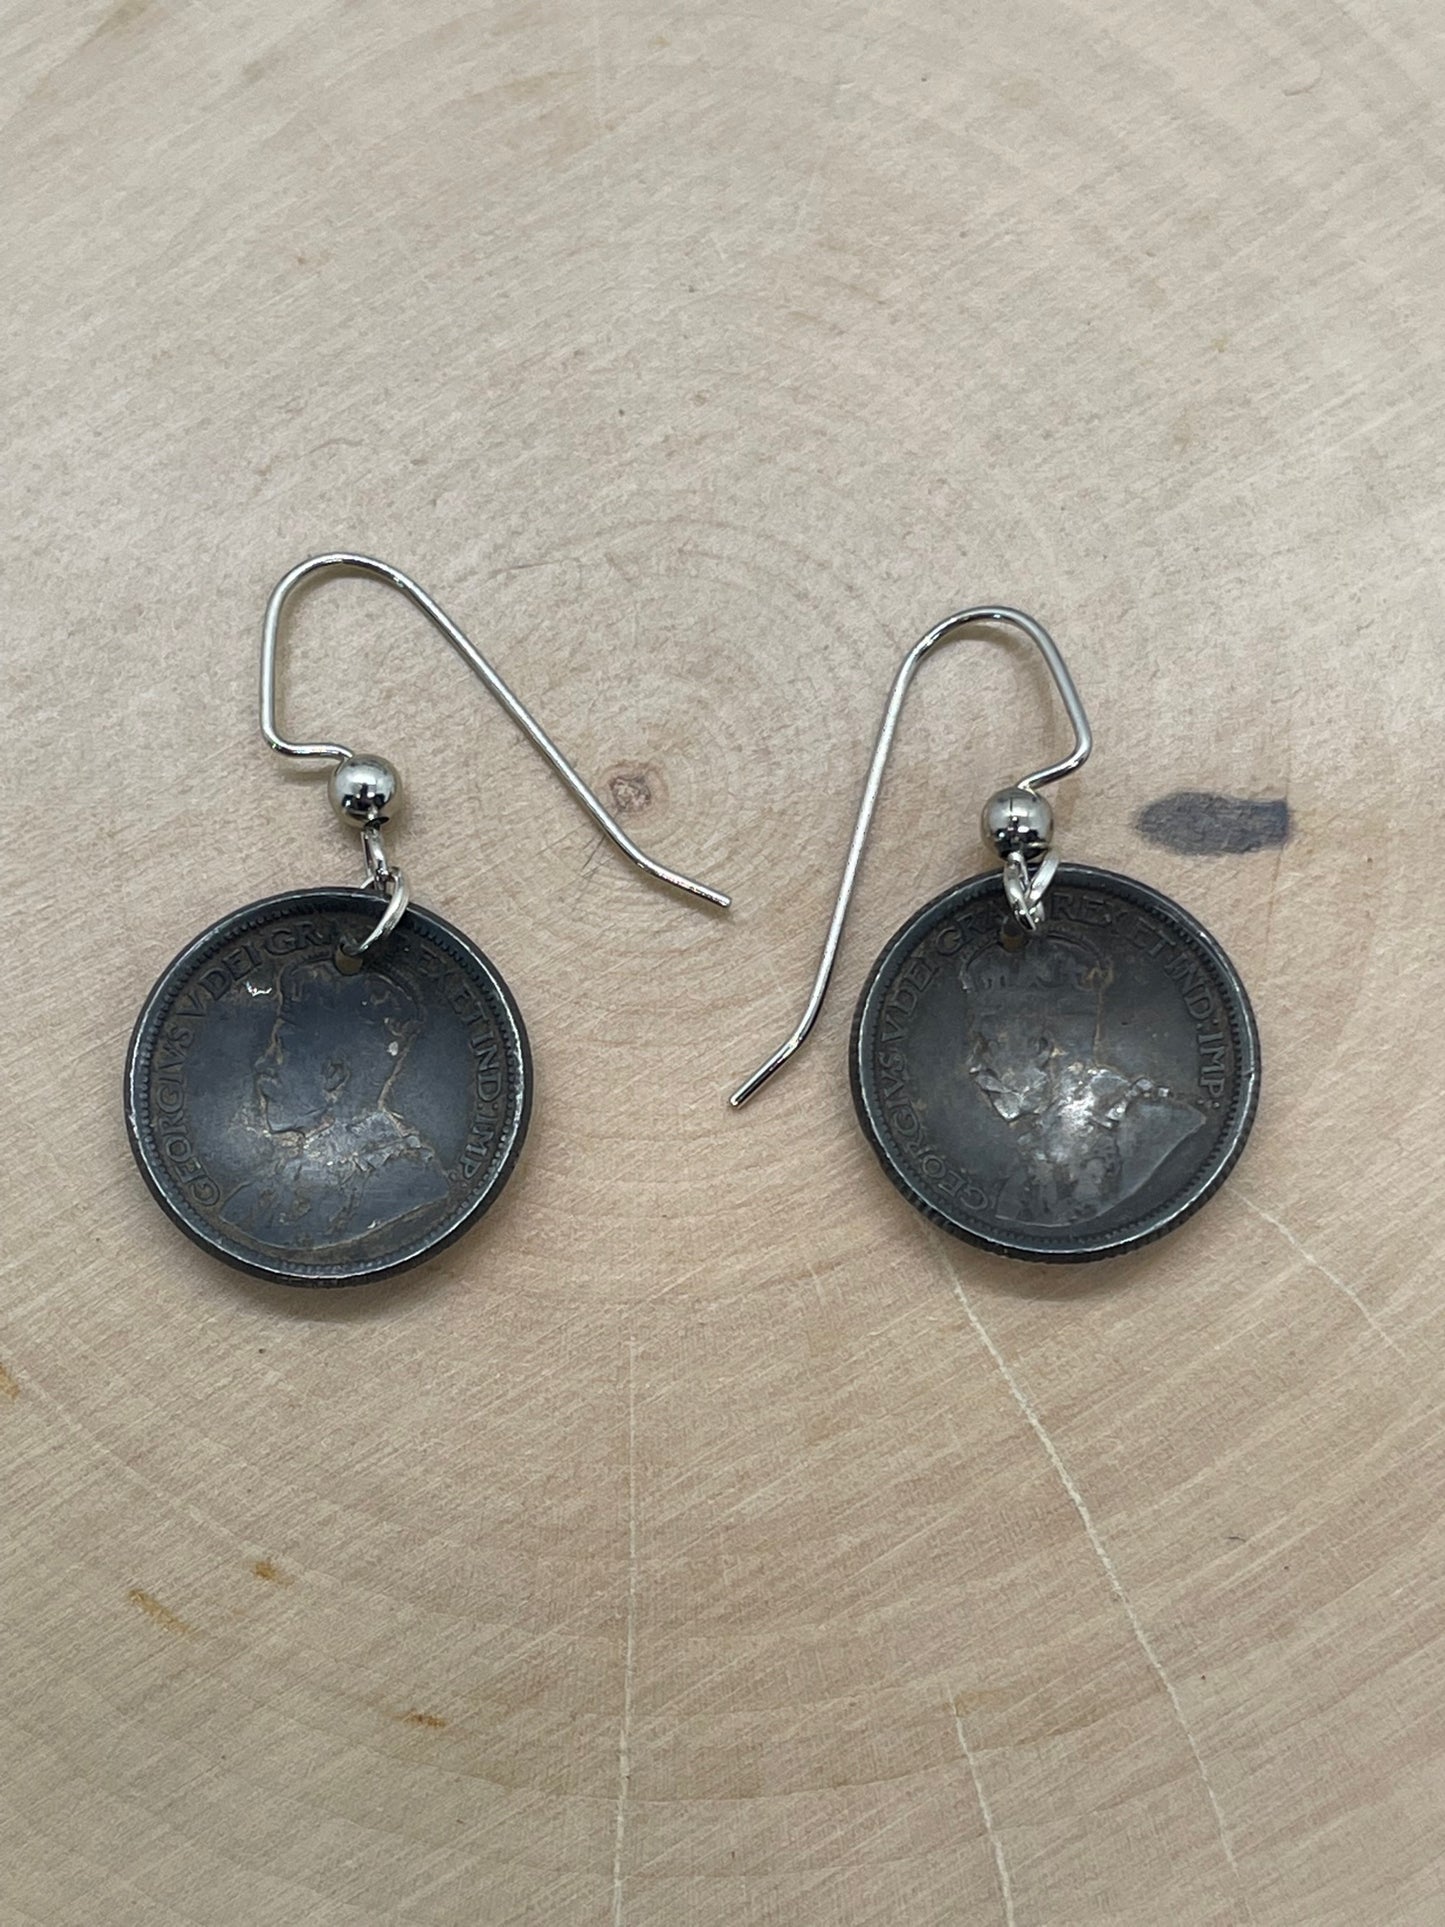 Canada 10 Cents Silver Earrings